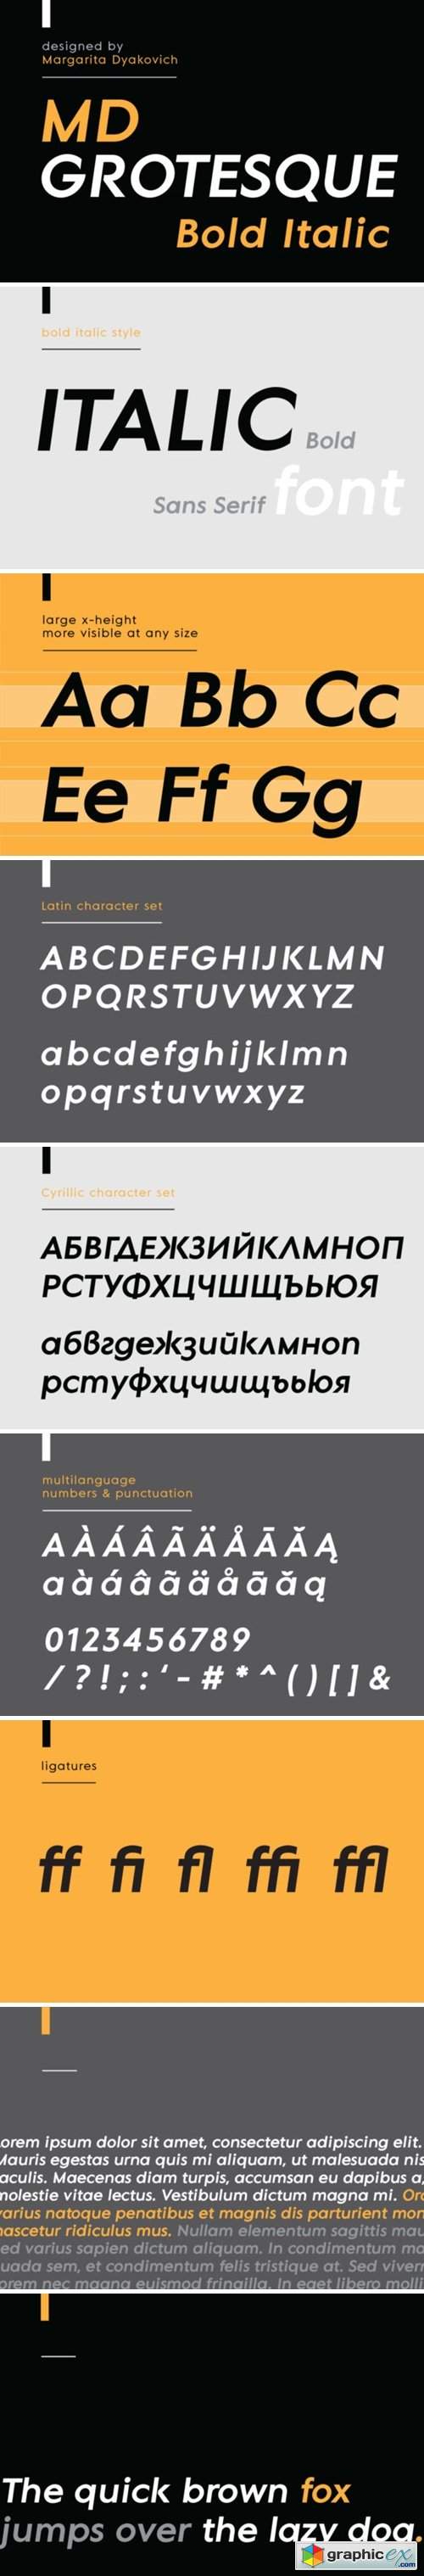 MD Grotesque Bold Italic Font